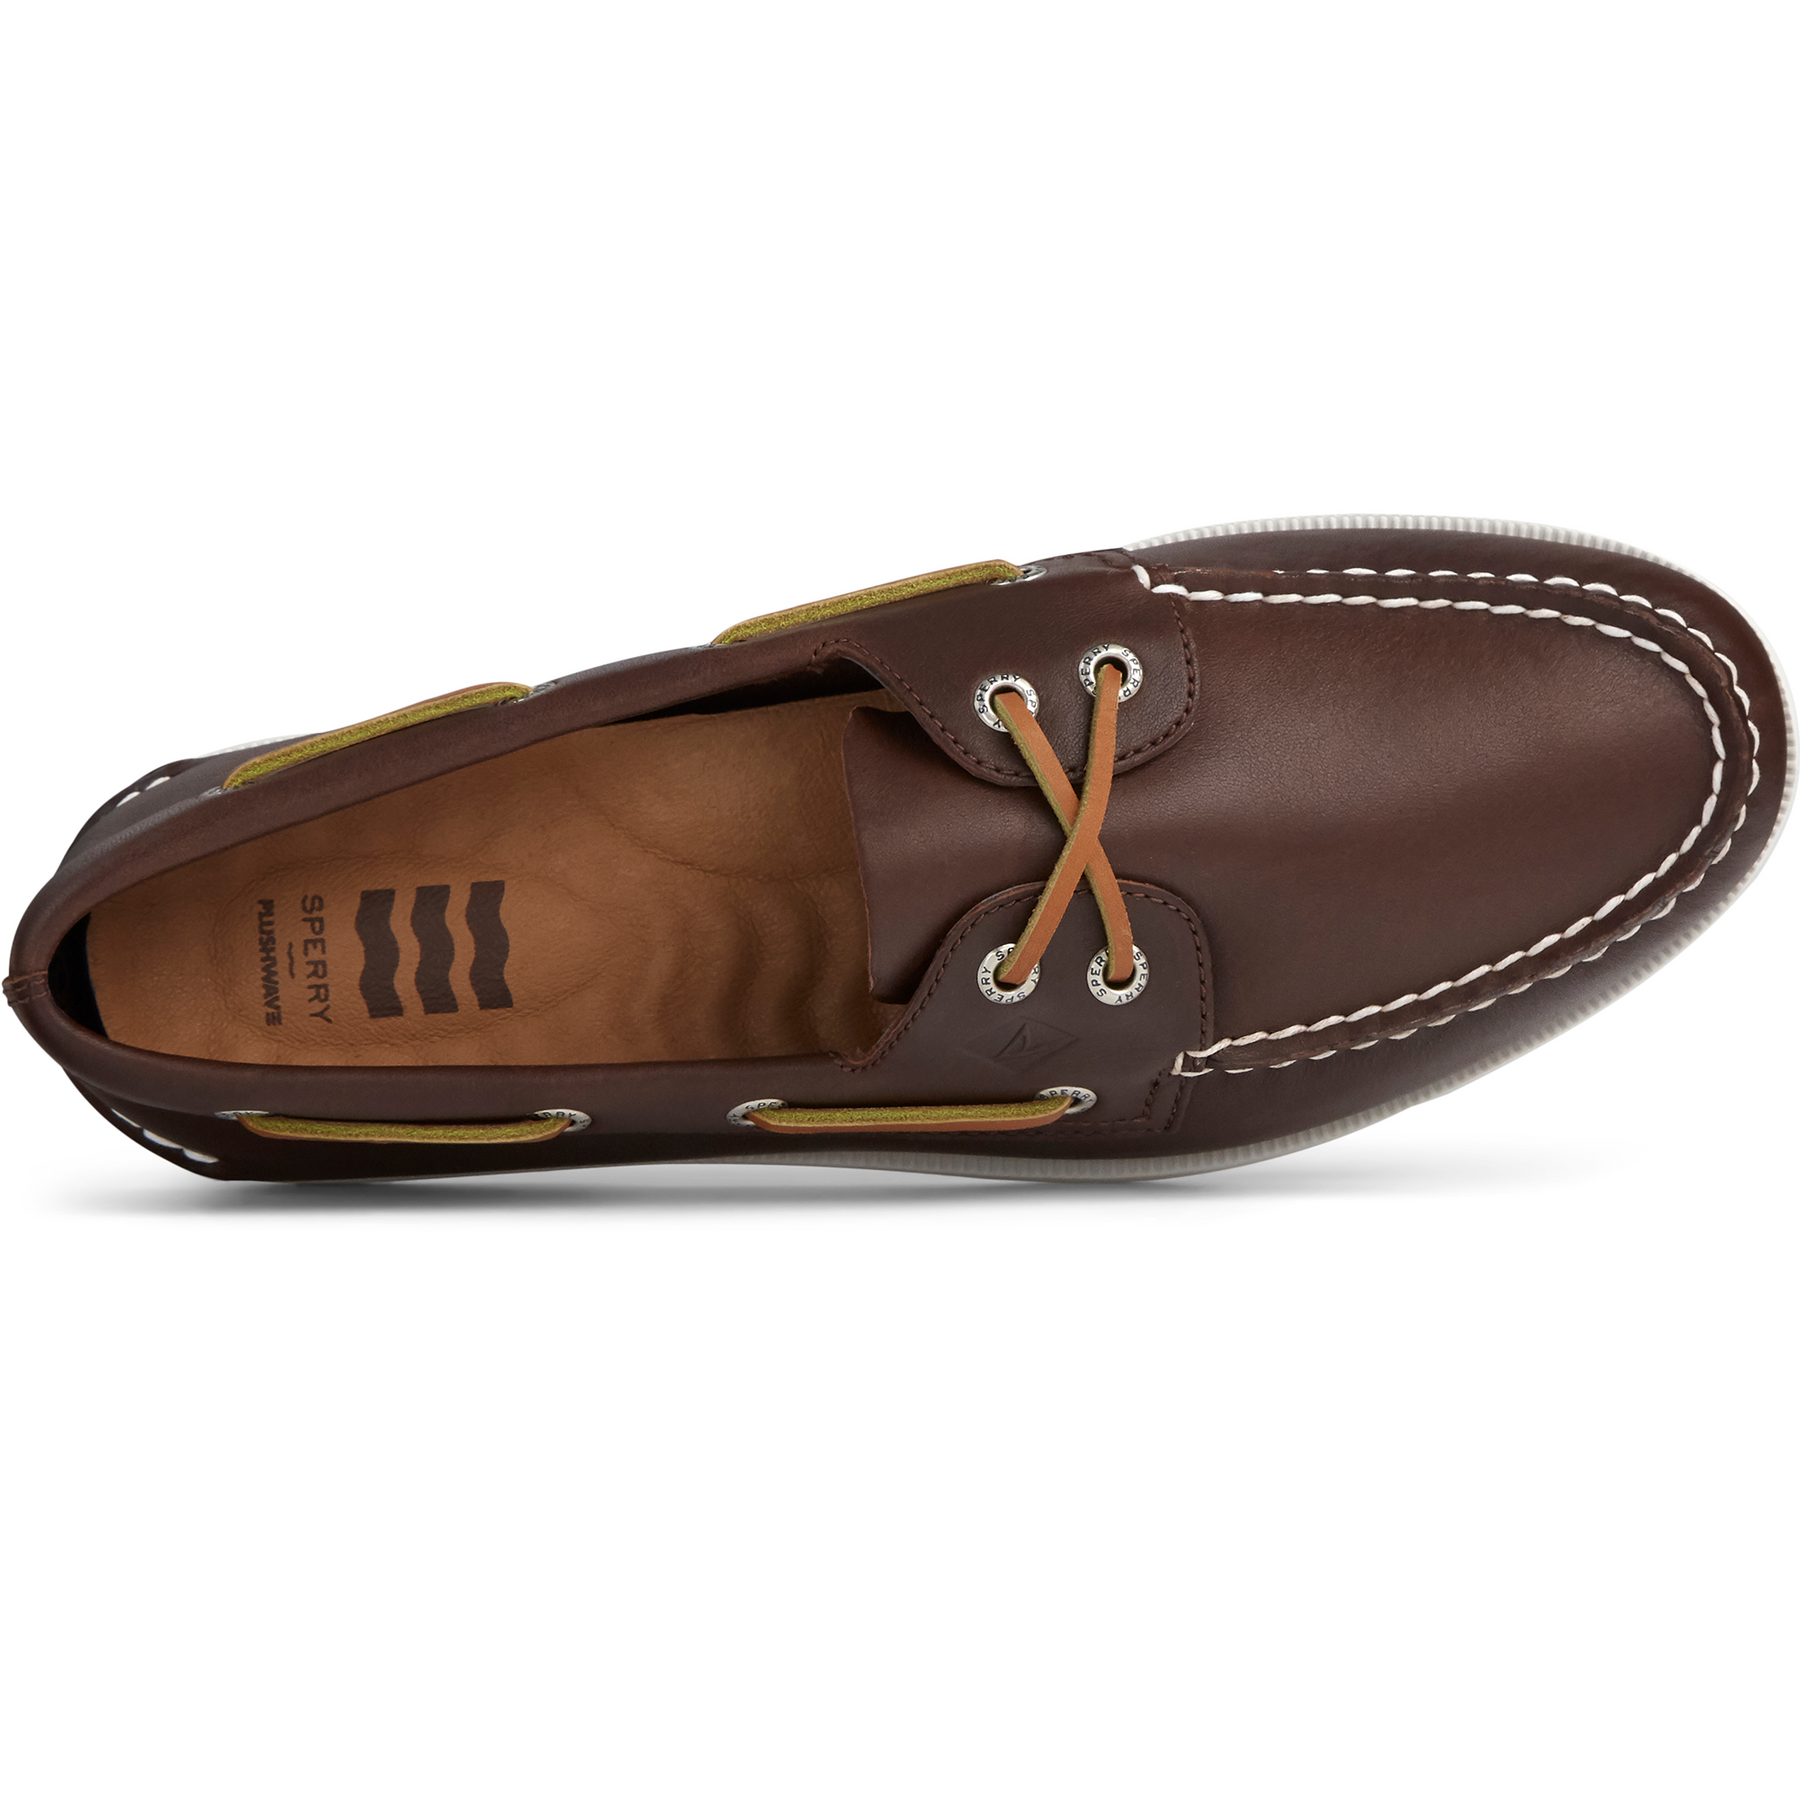 Mocasin Sperry Hombre AO Plushwave Brown SPERRY